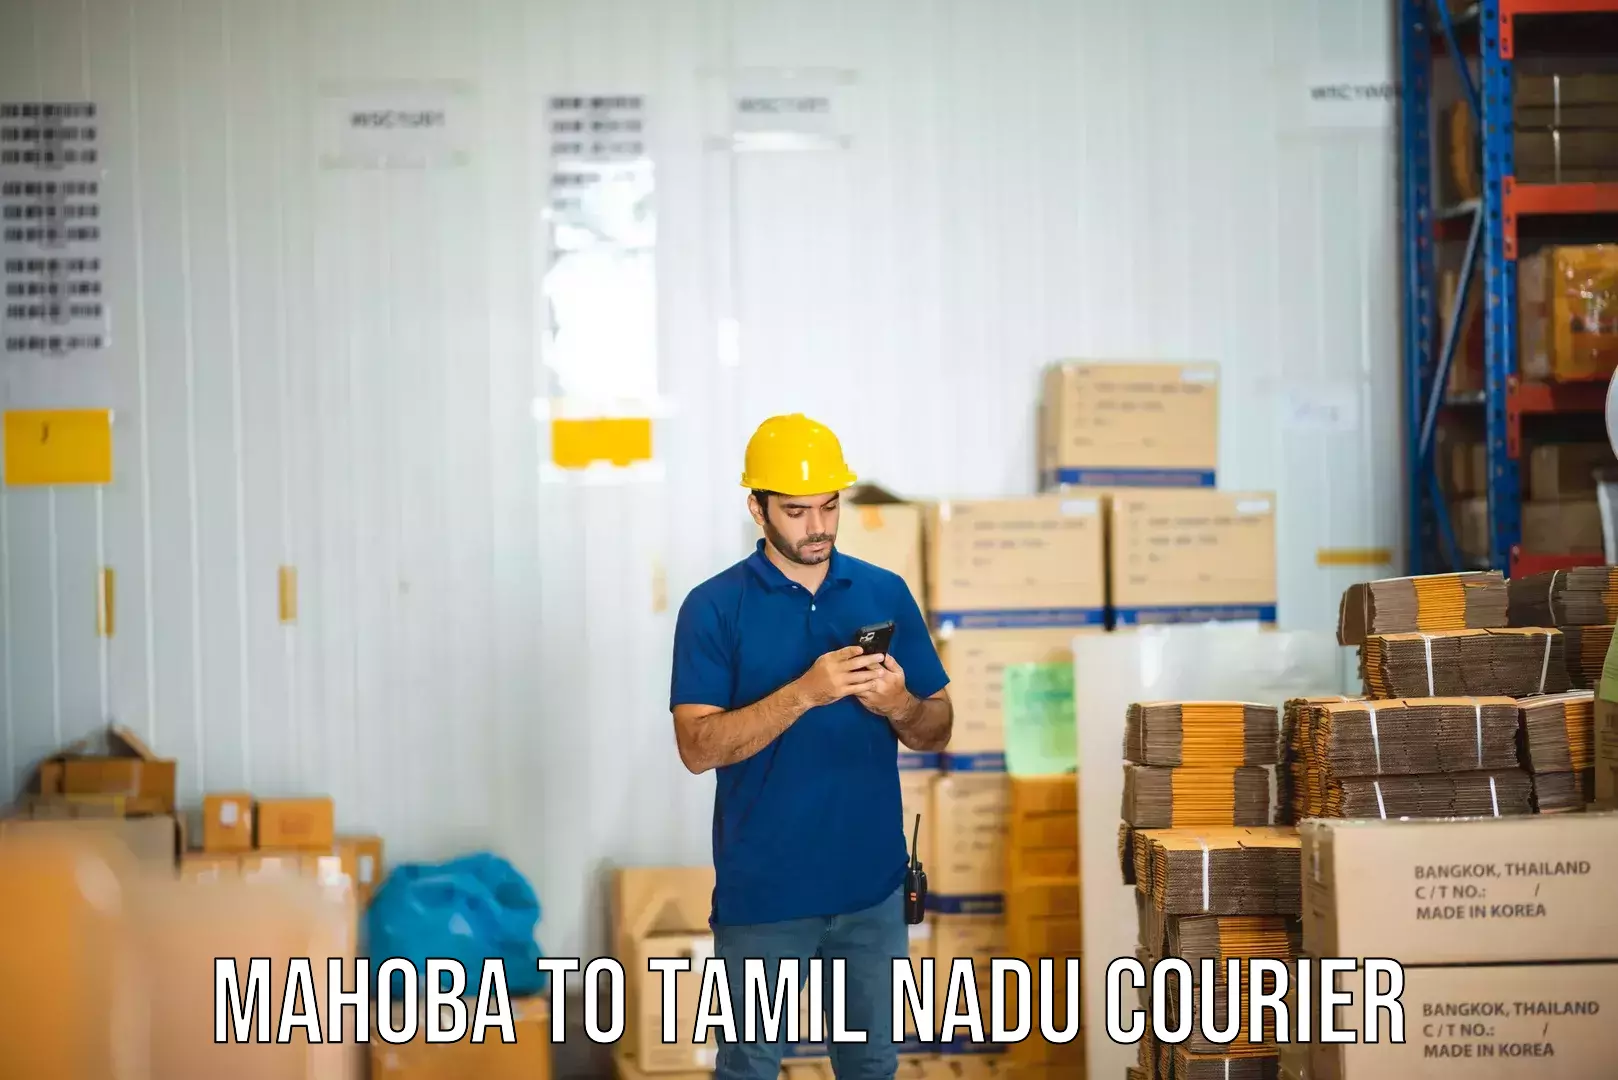 End-to-end delivery Mahoba to Cuddalore